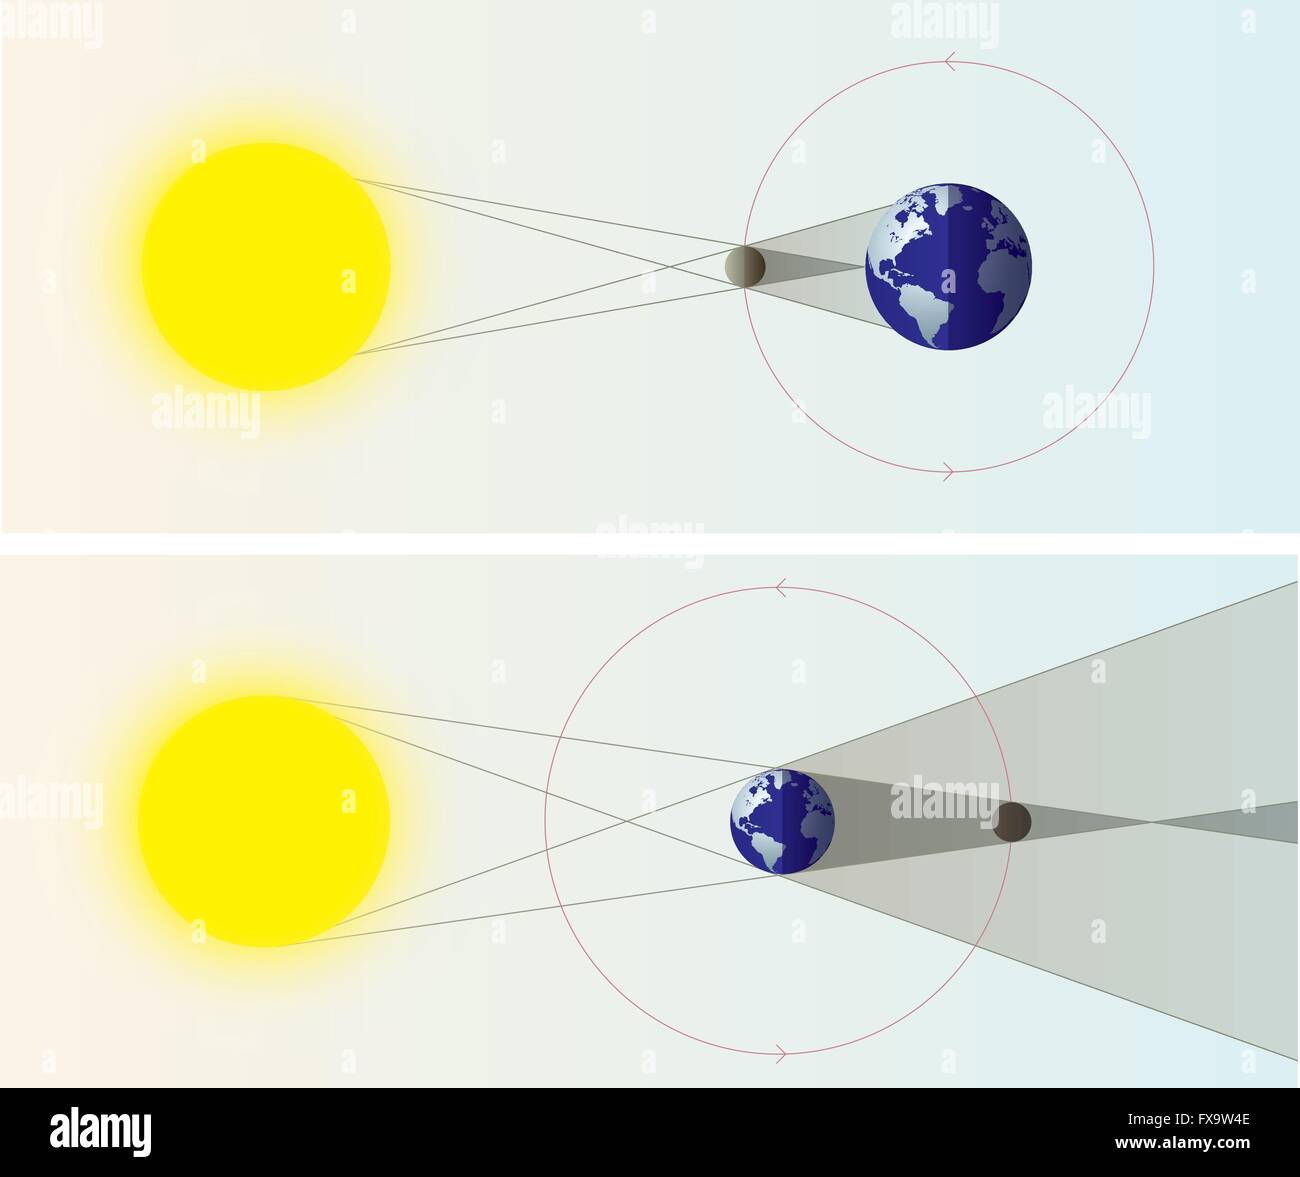 diagrams of solar and lunar eclipses